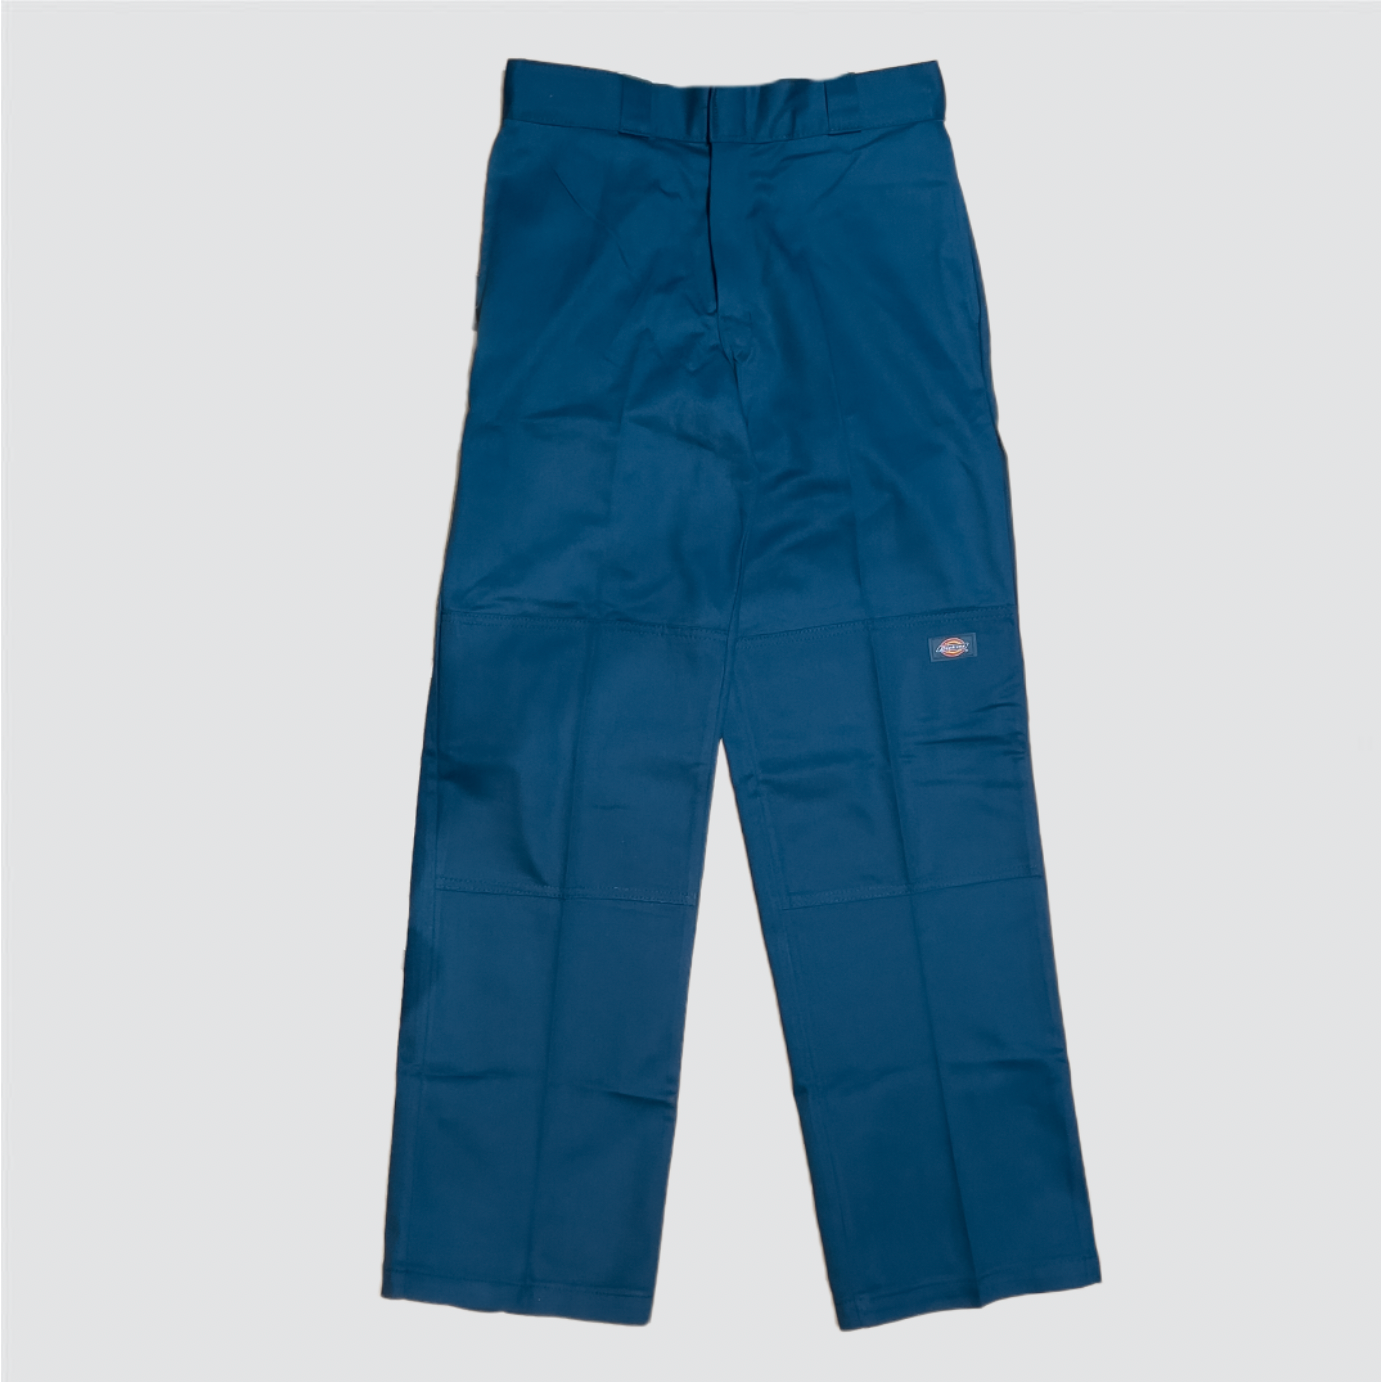 Dickies Twill Work Pants Loose Fit Reflecting Pond